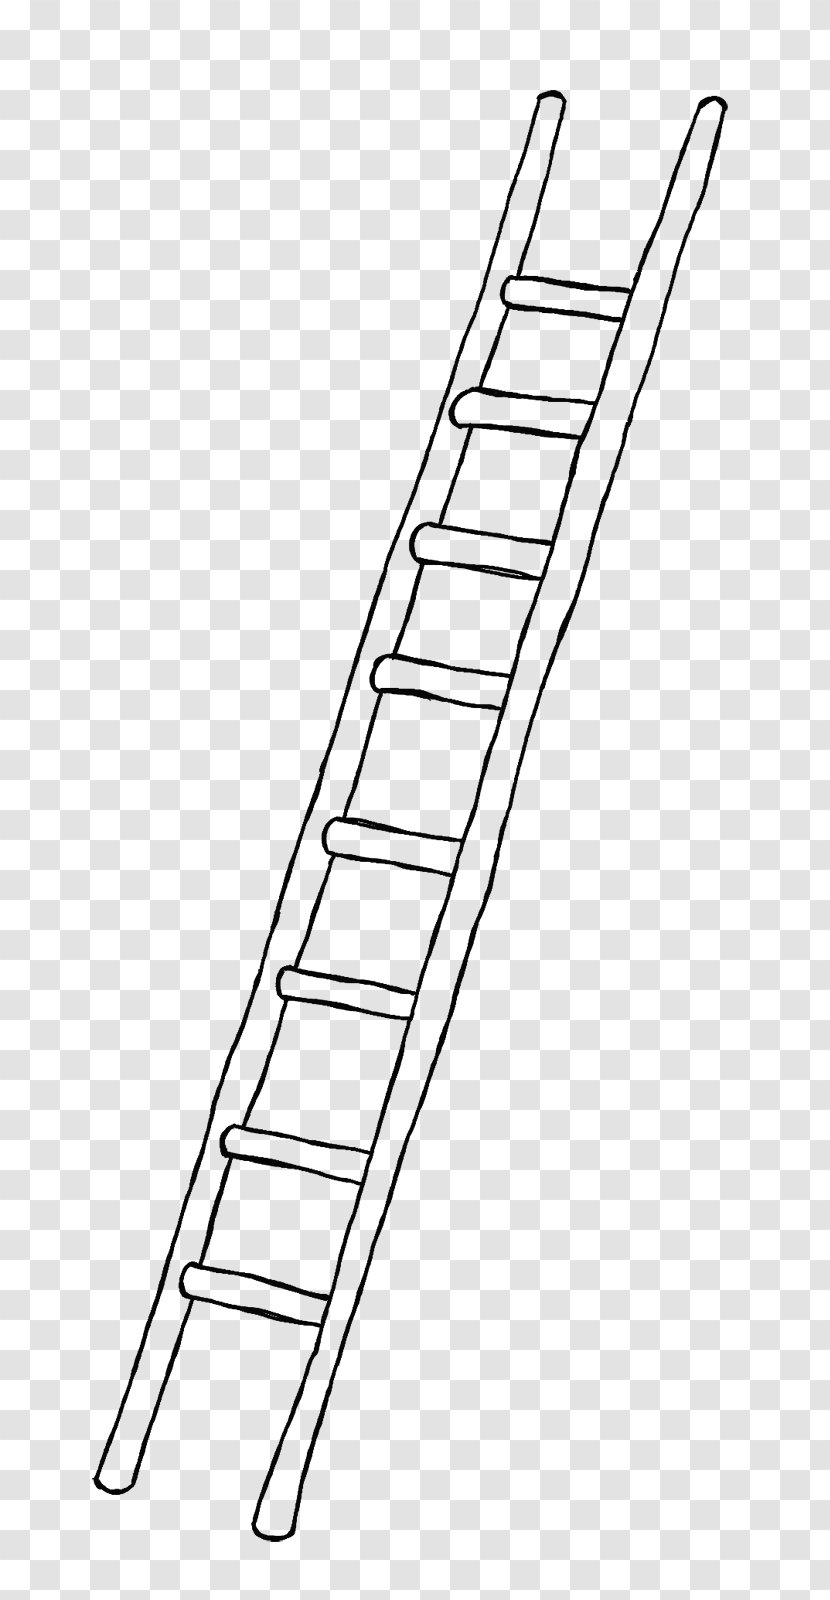 Picture Songs - Monochrome - Black Lines Ladder Transparent PNG